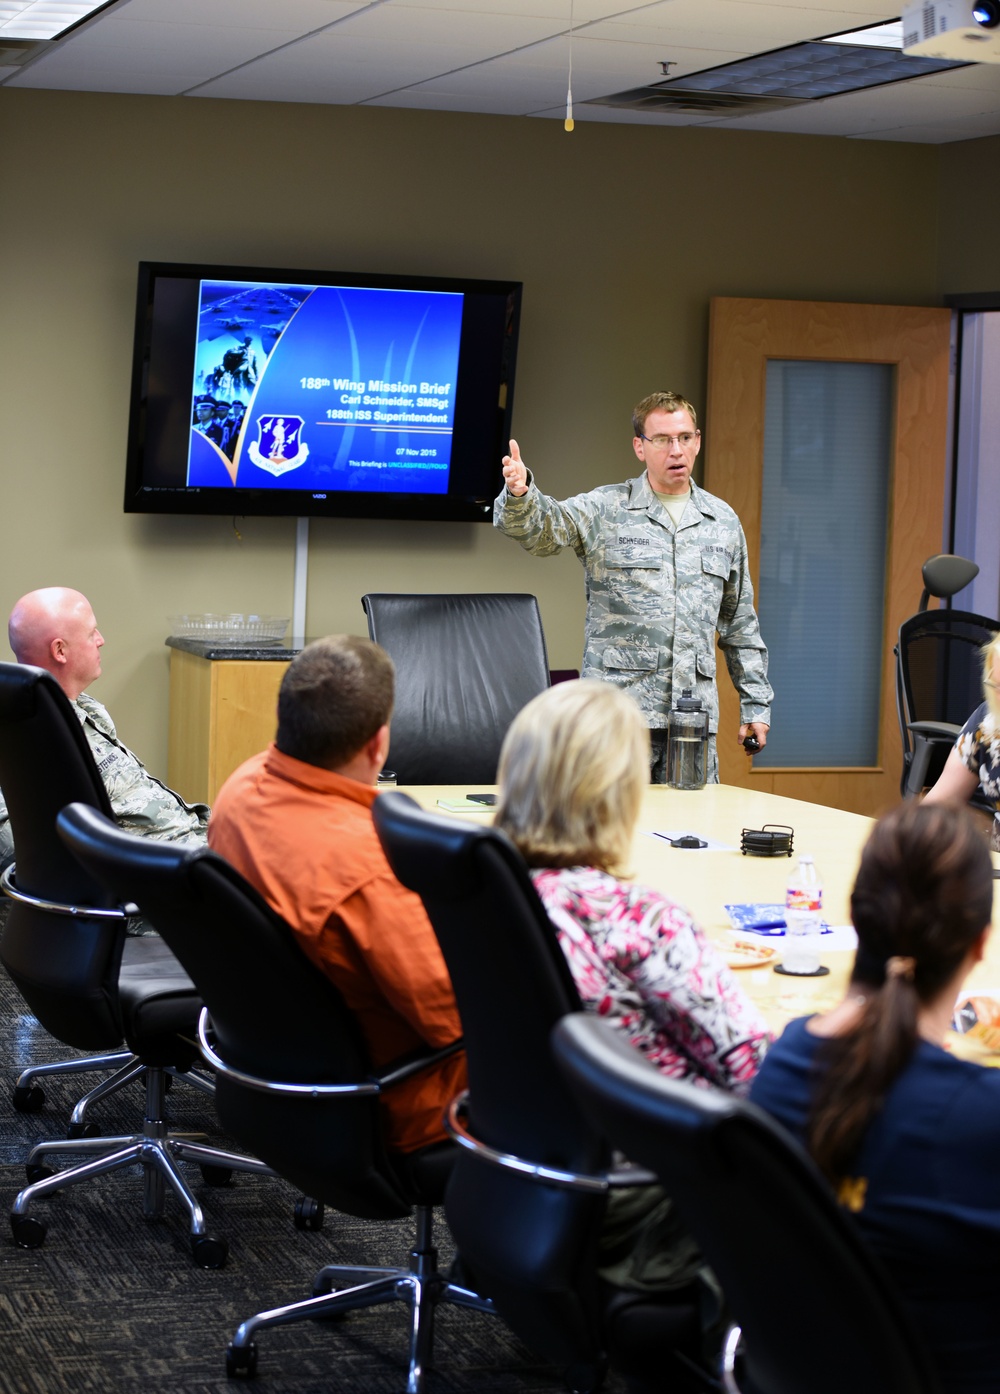 188th Wing provides mission insight to Airmen's families